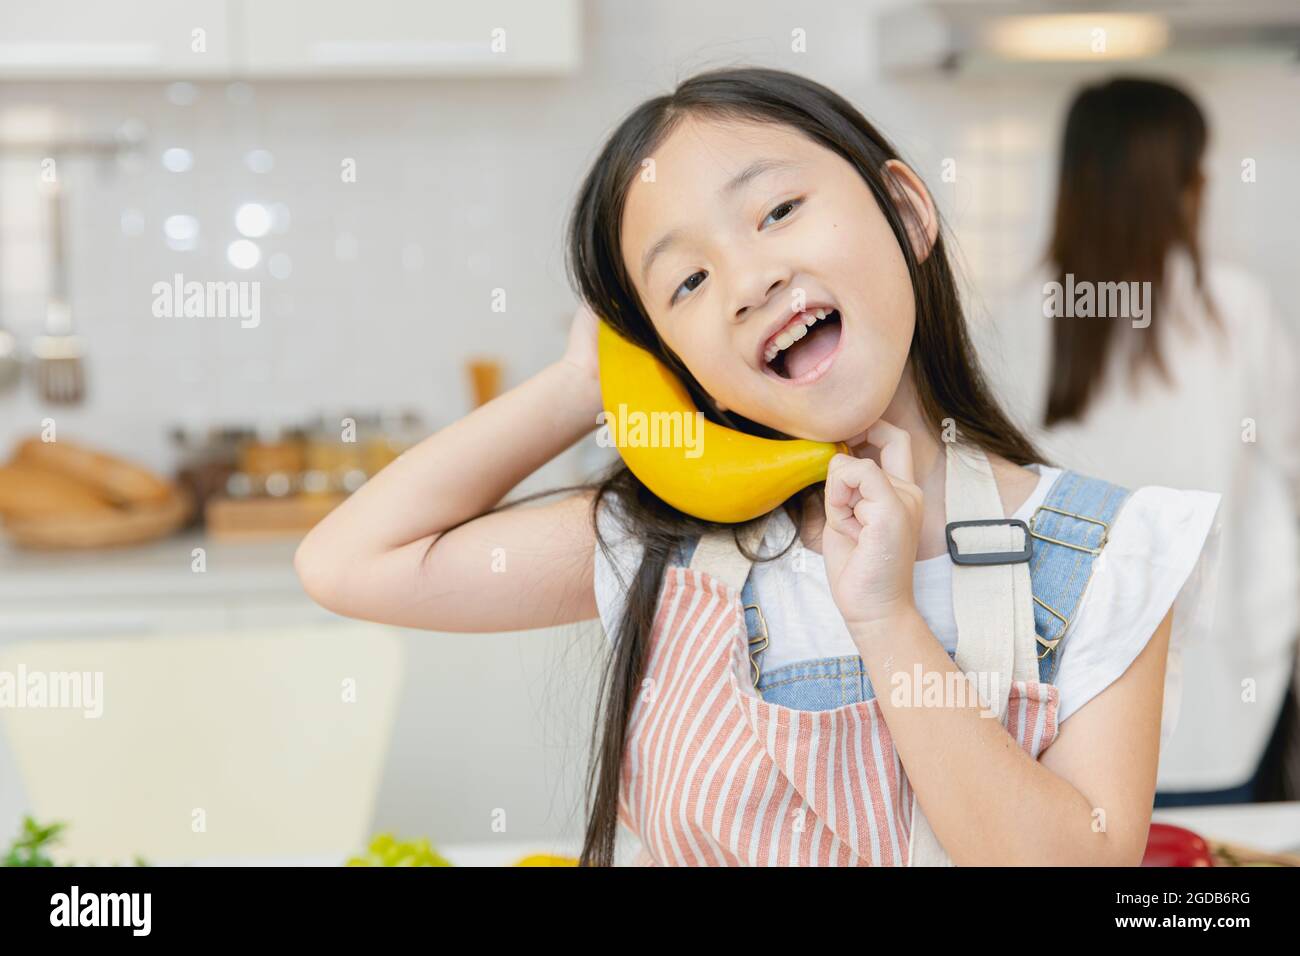 Cute girl child enjoy funny candid moment playing with banana at home kitchen. Stock Photo